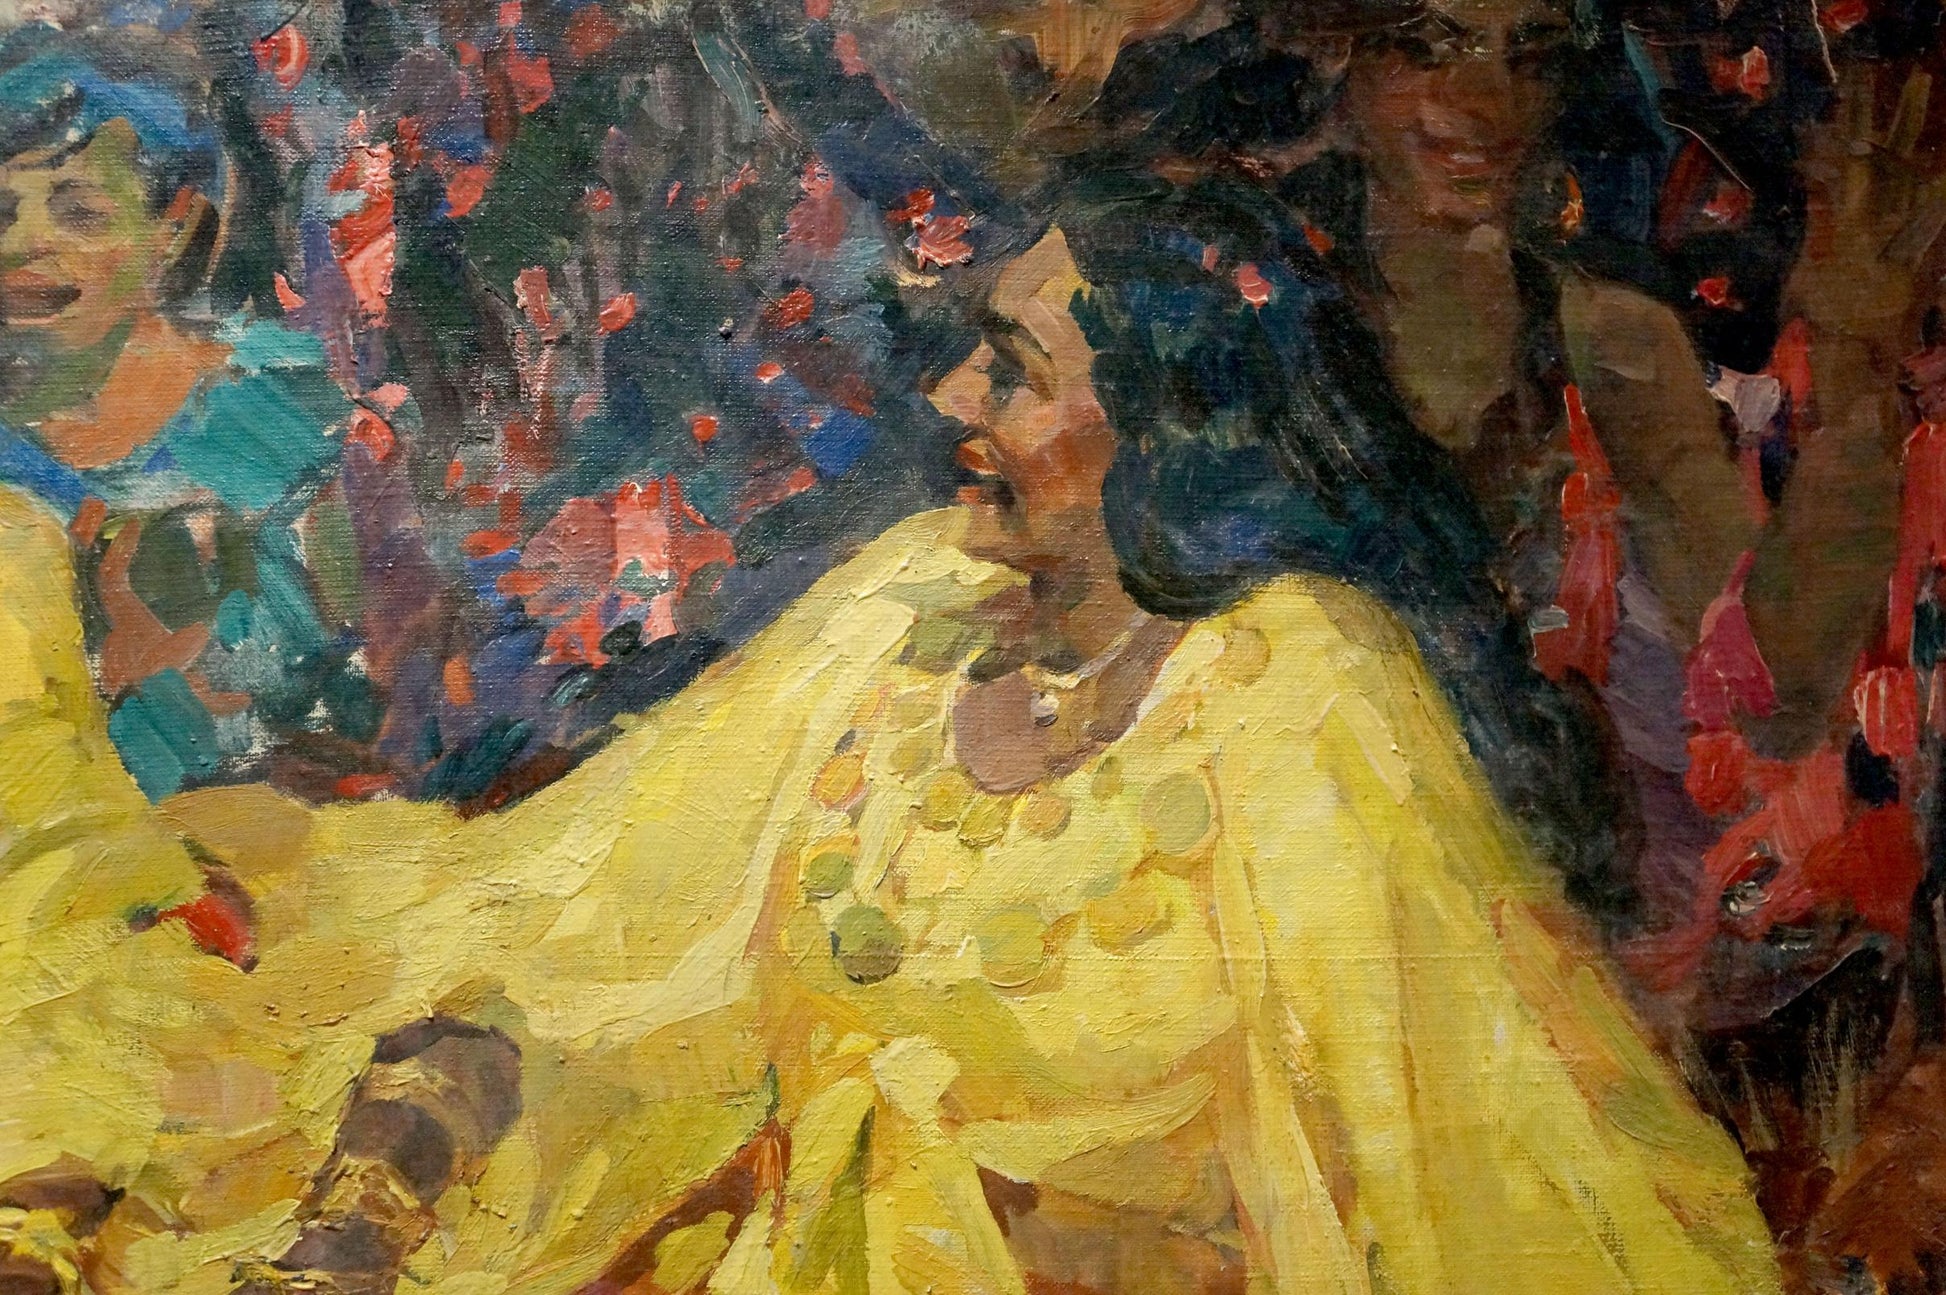 Gypsy maidens depicted in an oil painting by Maria Titarenko.